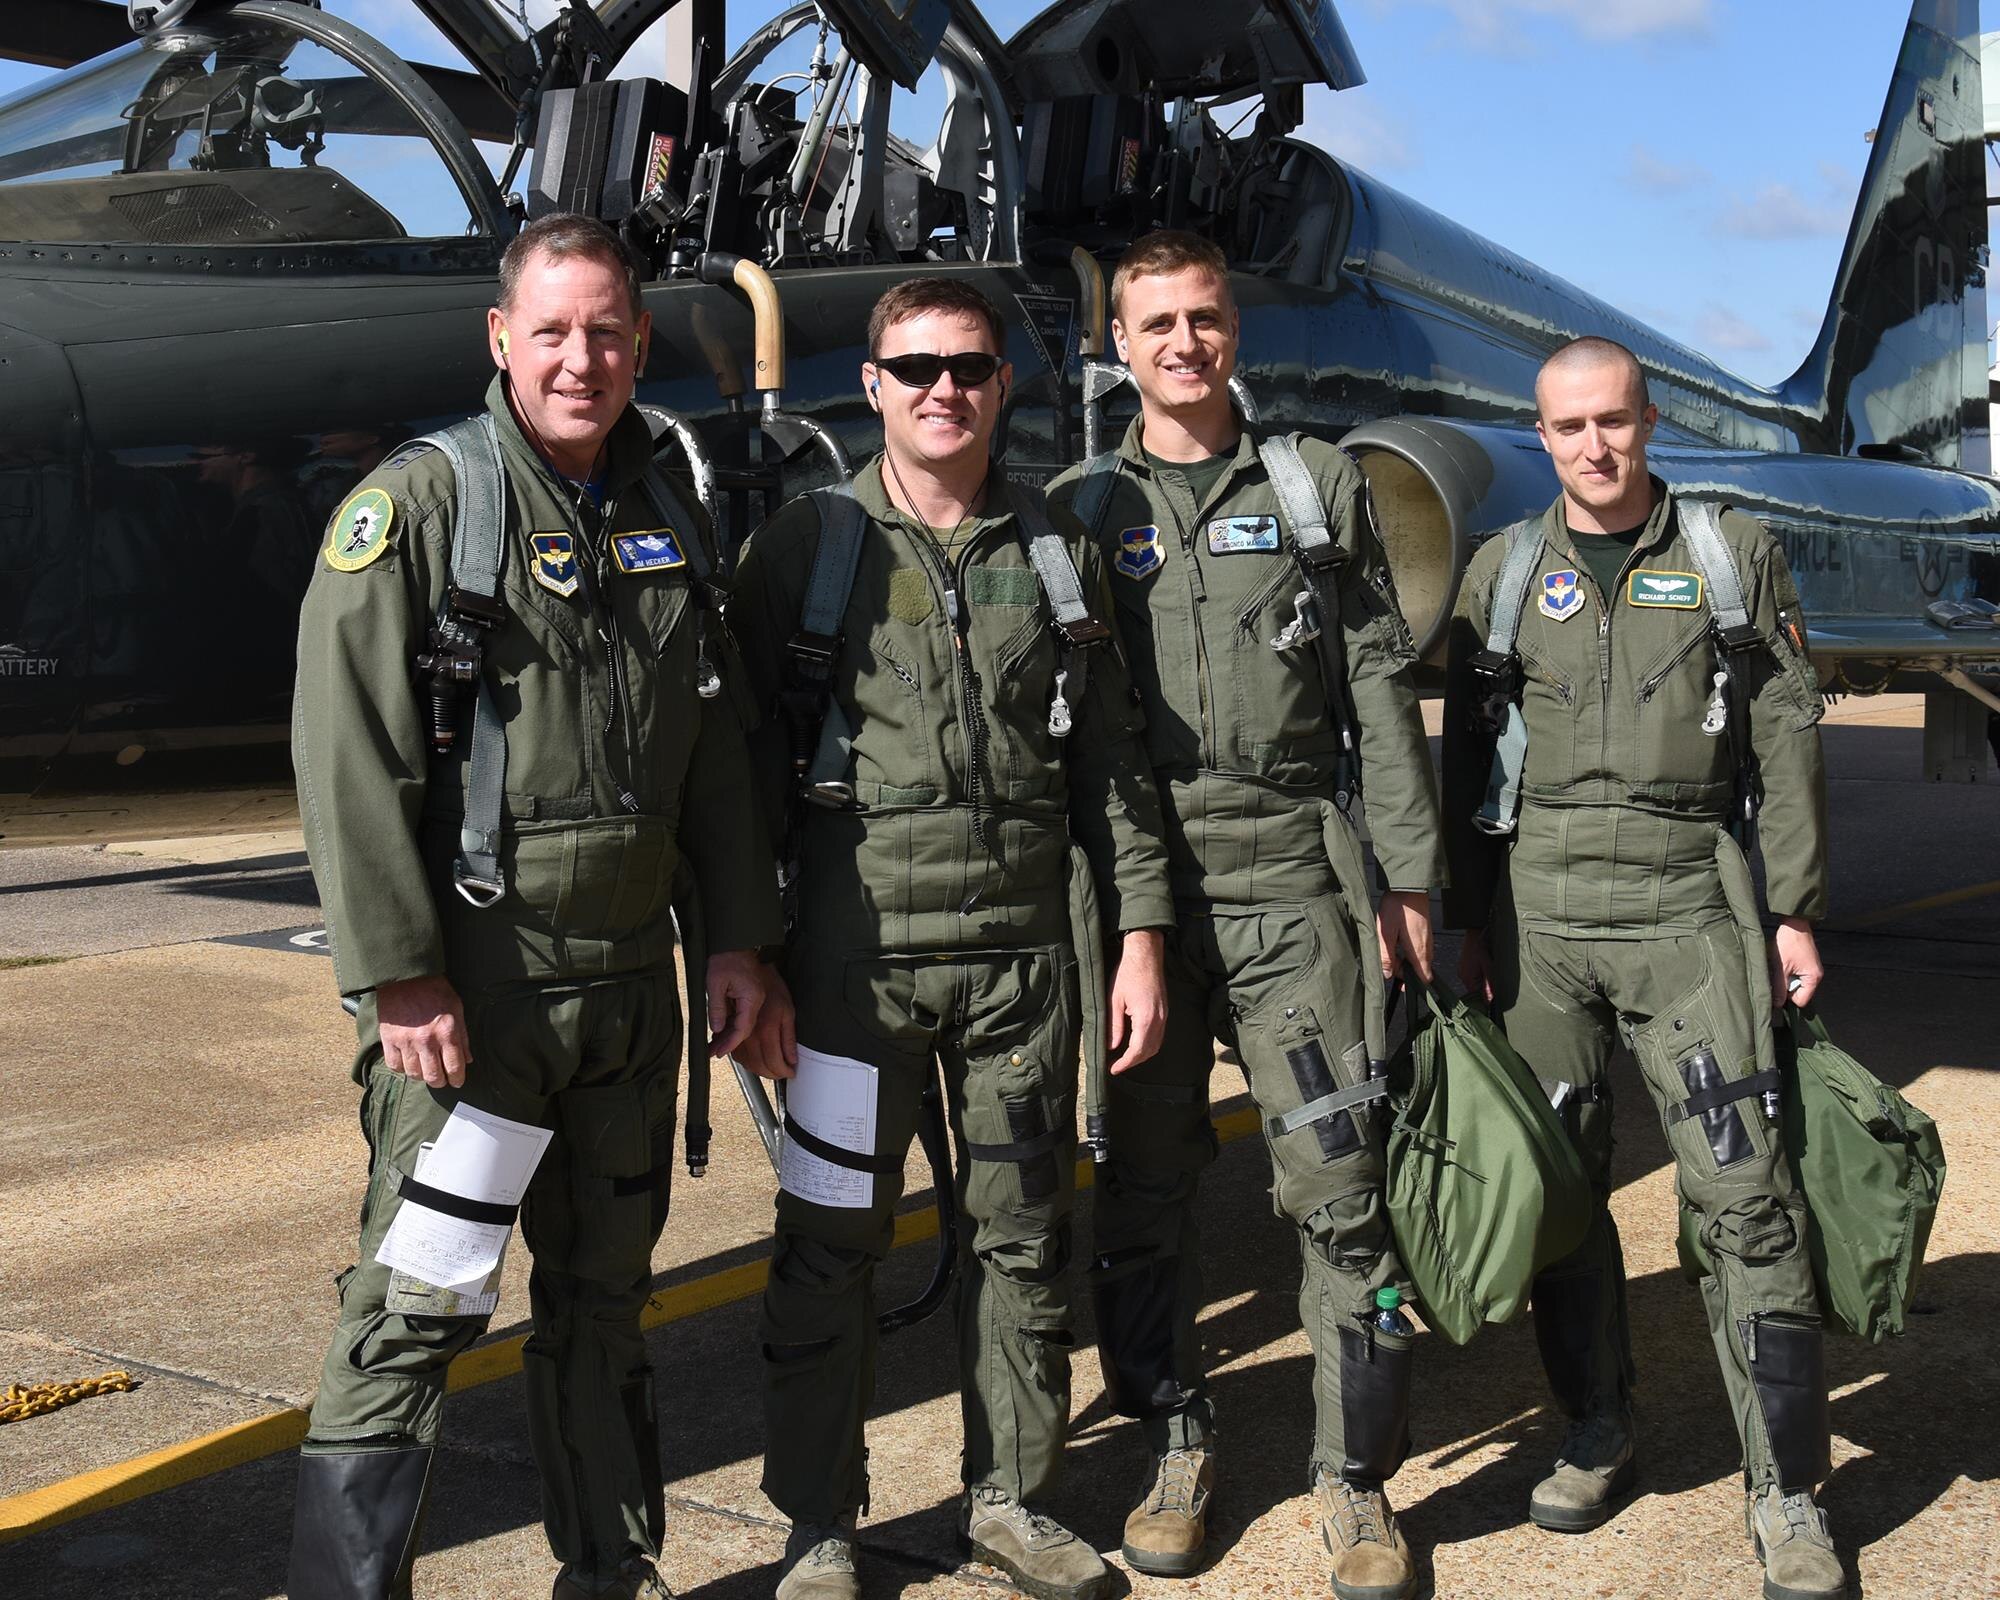 Maj. Gen. James Hecker, 19th Air Force Commander, poses for a photo with Maj. Caleb Campbell, 49th Fighter Training Squadron Instructor Pilot, Capt. Michael Mangano, 49th FTS IP, and 2nd Lt. Richard Scheff, 49th FTS student, Oct. 21, 2016, on the flight line on Columbus Air Force Base, Mississippi. Hecker toured the 14th Flying Training Wing and went for a ride in a T-38C Talon student sortie for Introduction to Fighter Fundamentals. (U.S. Air Force photo by Elizabeth Owens)